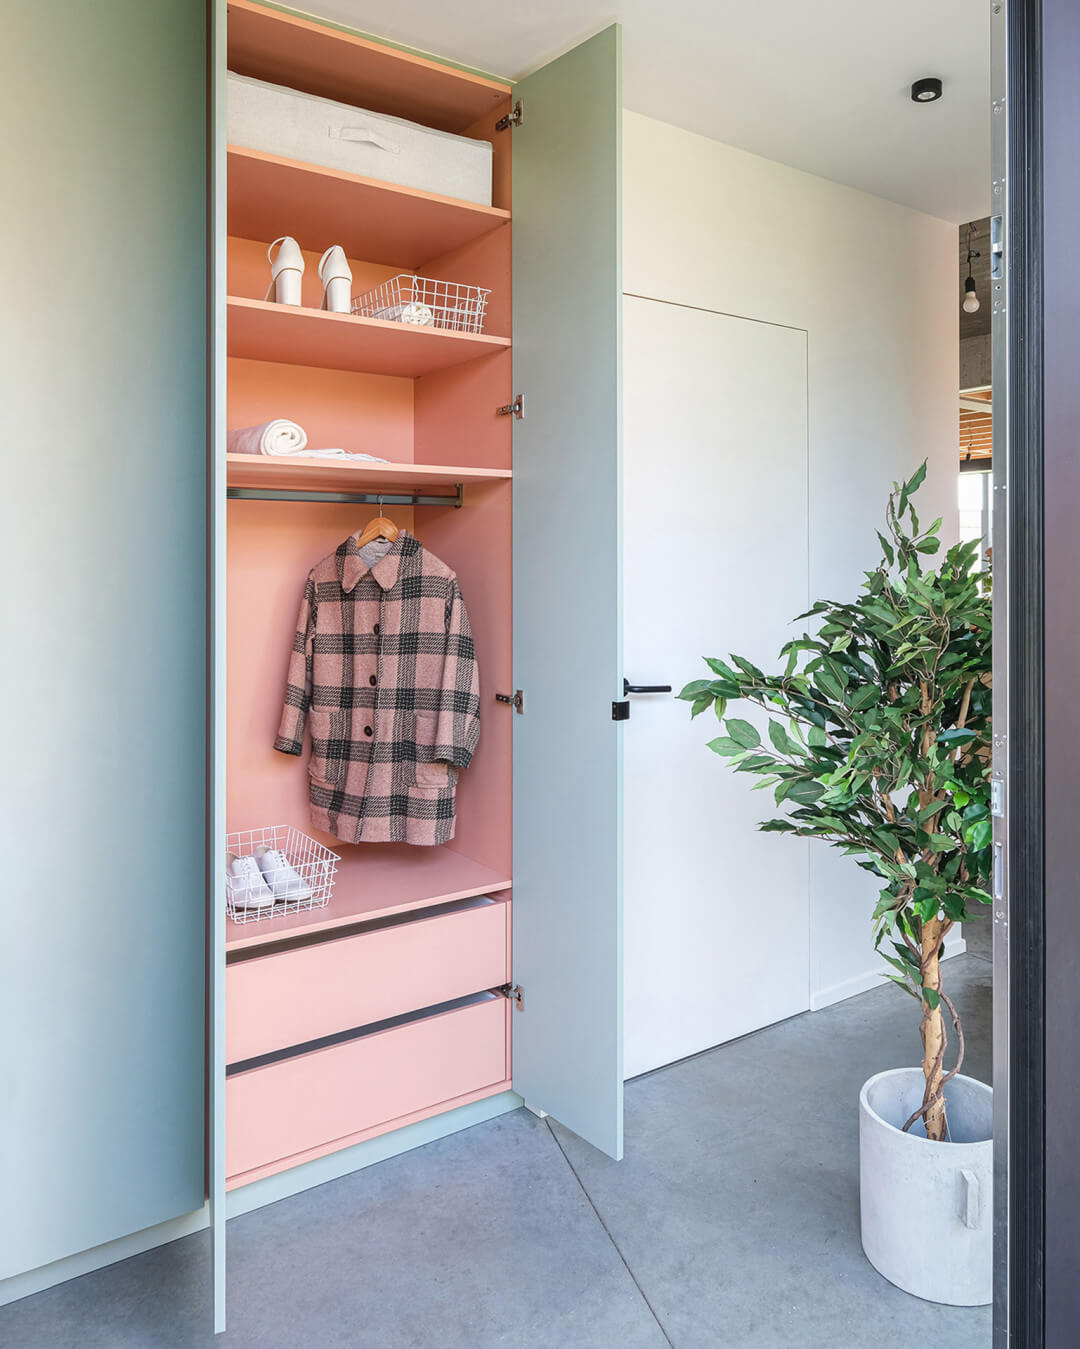 Custom wardrobe for the vestibule in industrial green with a pink interior, in a modern home